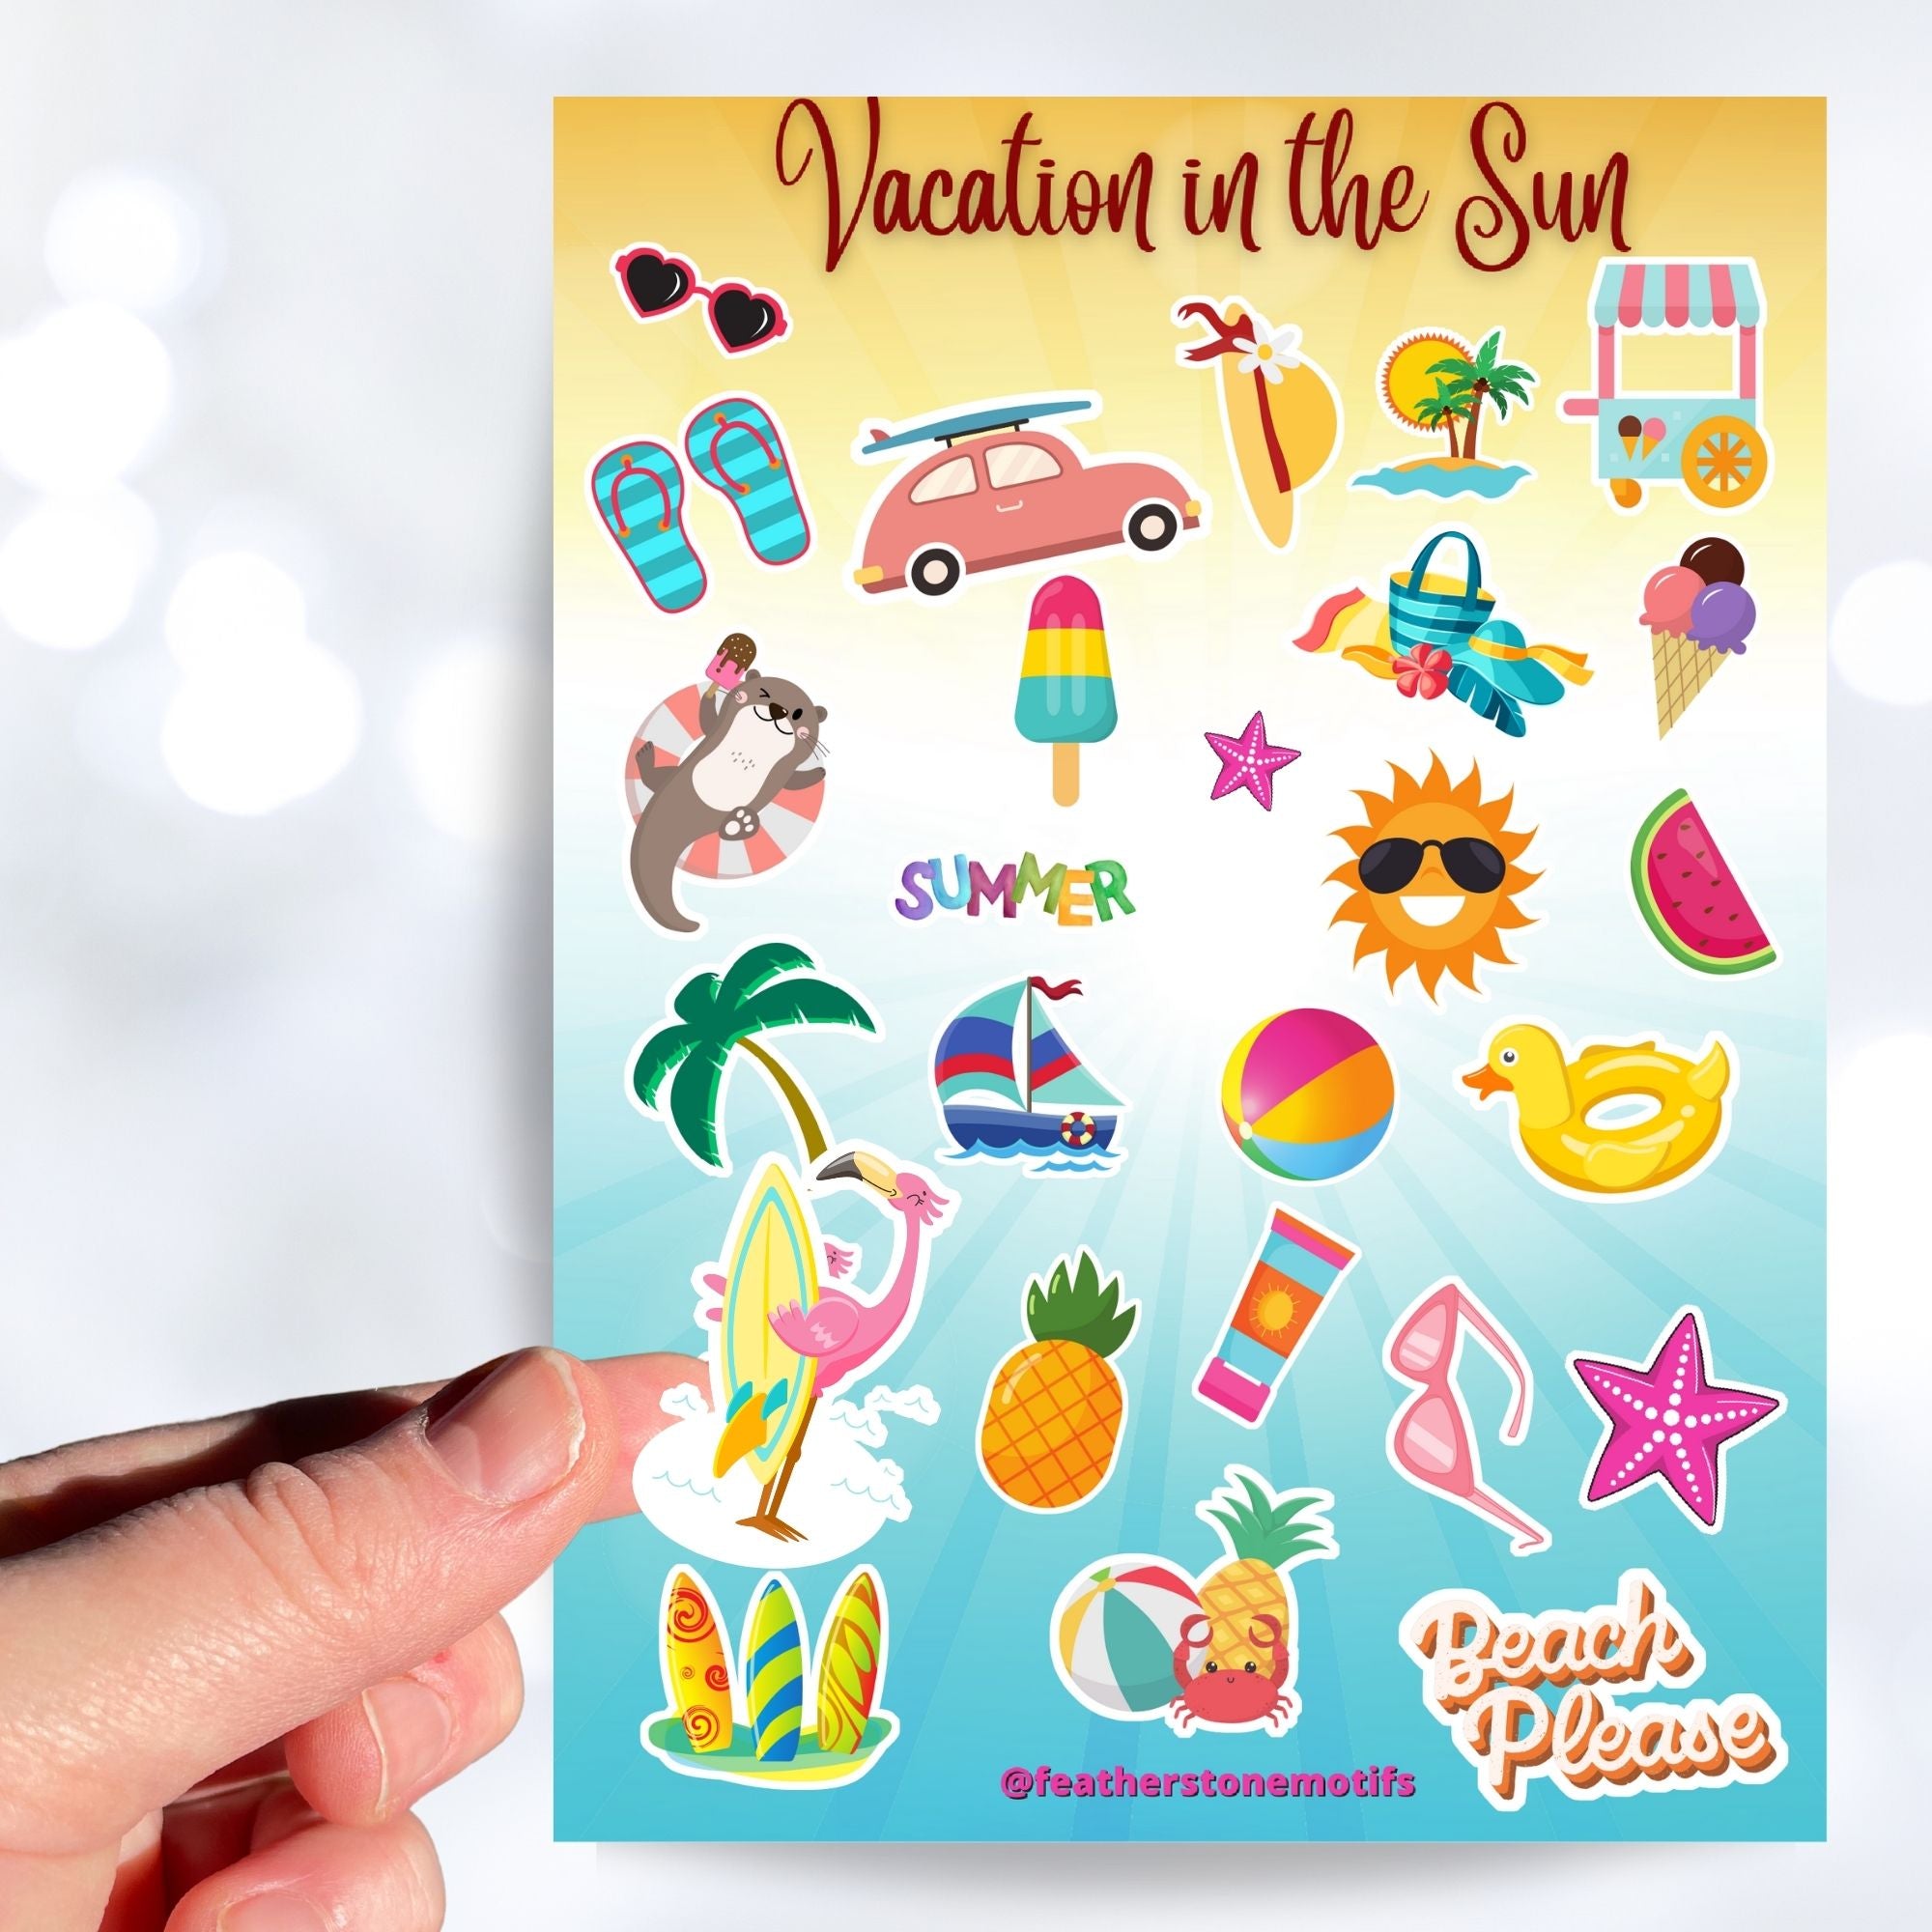 Pack your sunscreen and flip flops for a Vacation in the Sun! This sticker sheet is filled with summer vacation sticker images like the sun with sunglasses, a rubber ducky float ring, ice cream, and a sailboat. This image shows a hand holding a sticker of a flamingo with a surfboard above the sticker sheet.